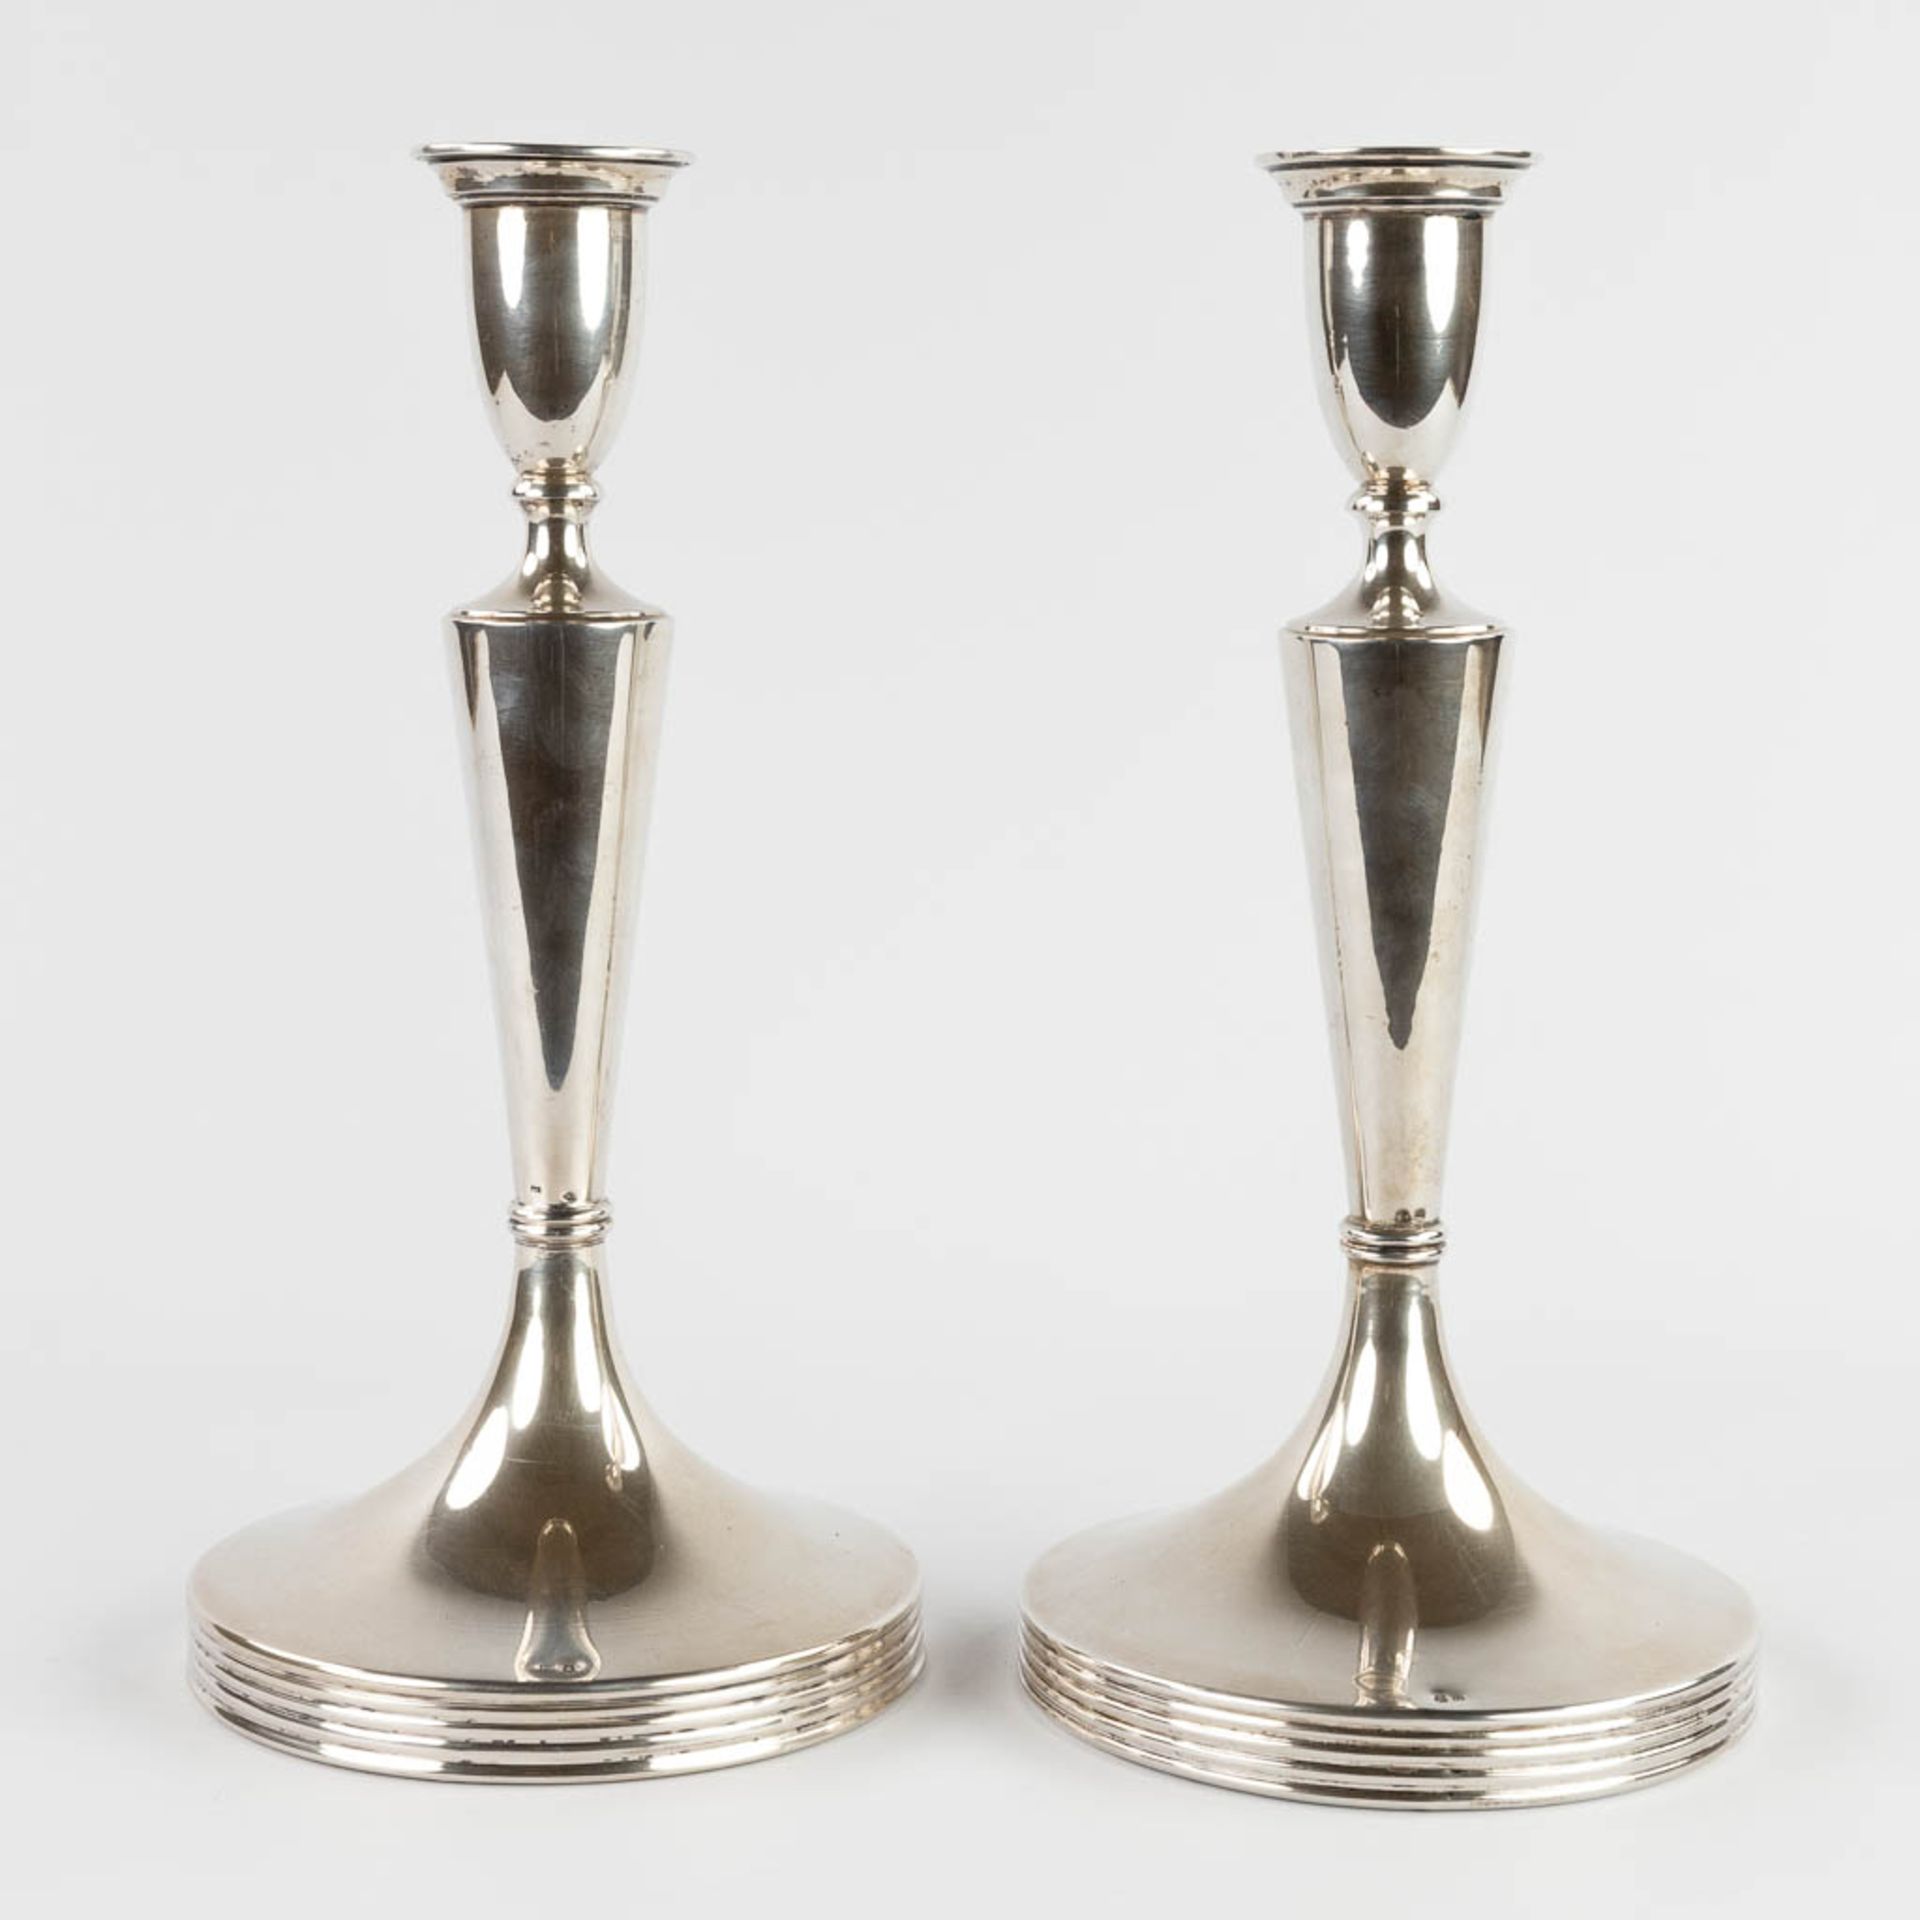 A pair of candle holders, silver, 800/1000, marked Vienna, Austria. 1872-1922. 1152g. (W:16,5 x H:34